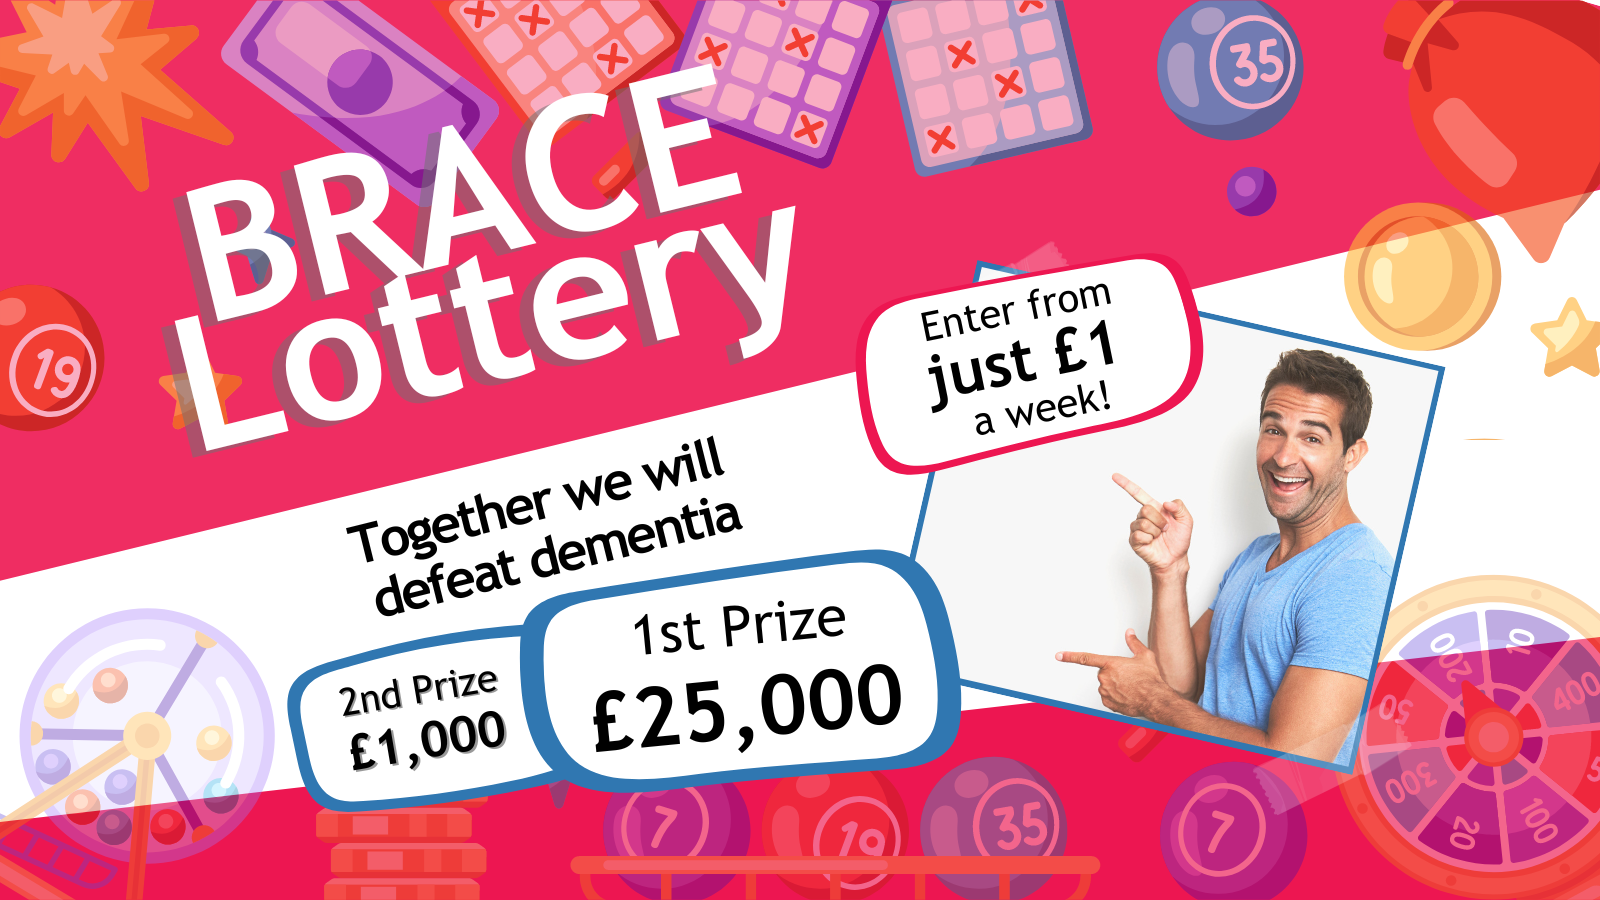 BRACE lottery. Together we will defeat dementia. A red background with lots of lottery balls and lottery tickets. A man is pointing to a sign saying 'from just £1 per week.'